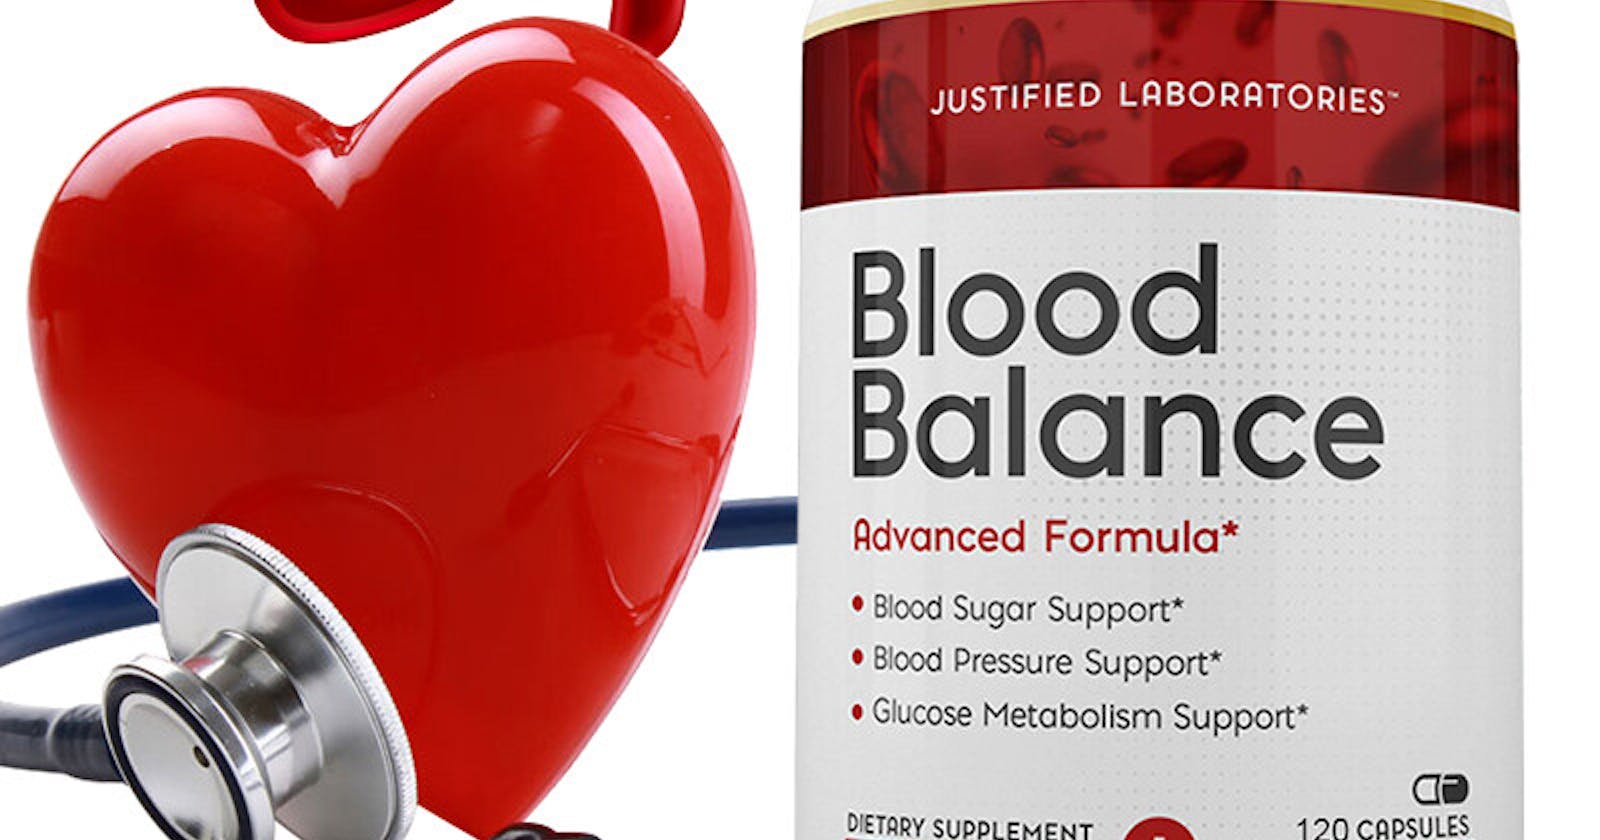 Guardian Blood Balance Reviews Does It Work? Ingredients, Benefits, Amazon & Where To Buy? USA, Canada, Australia...all geo's